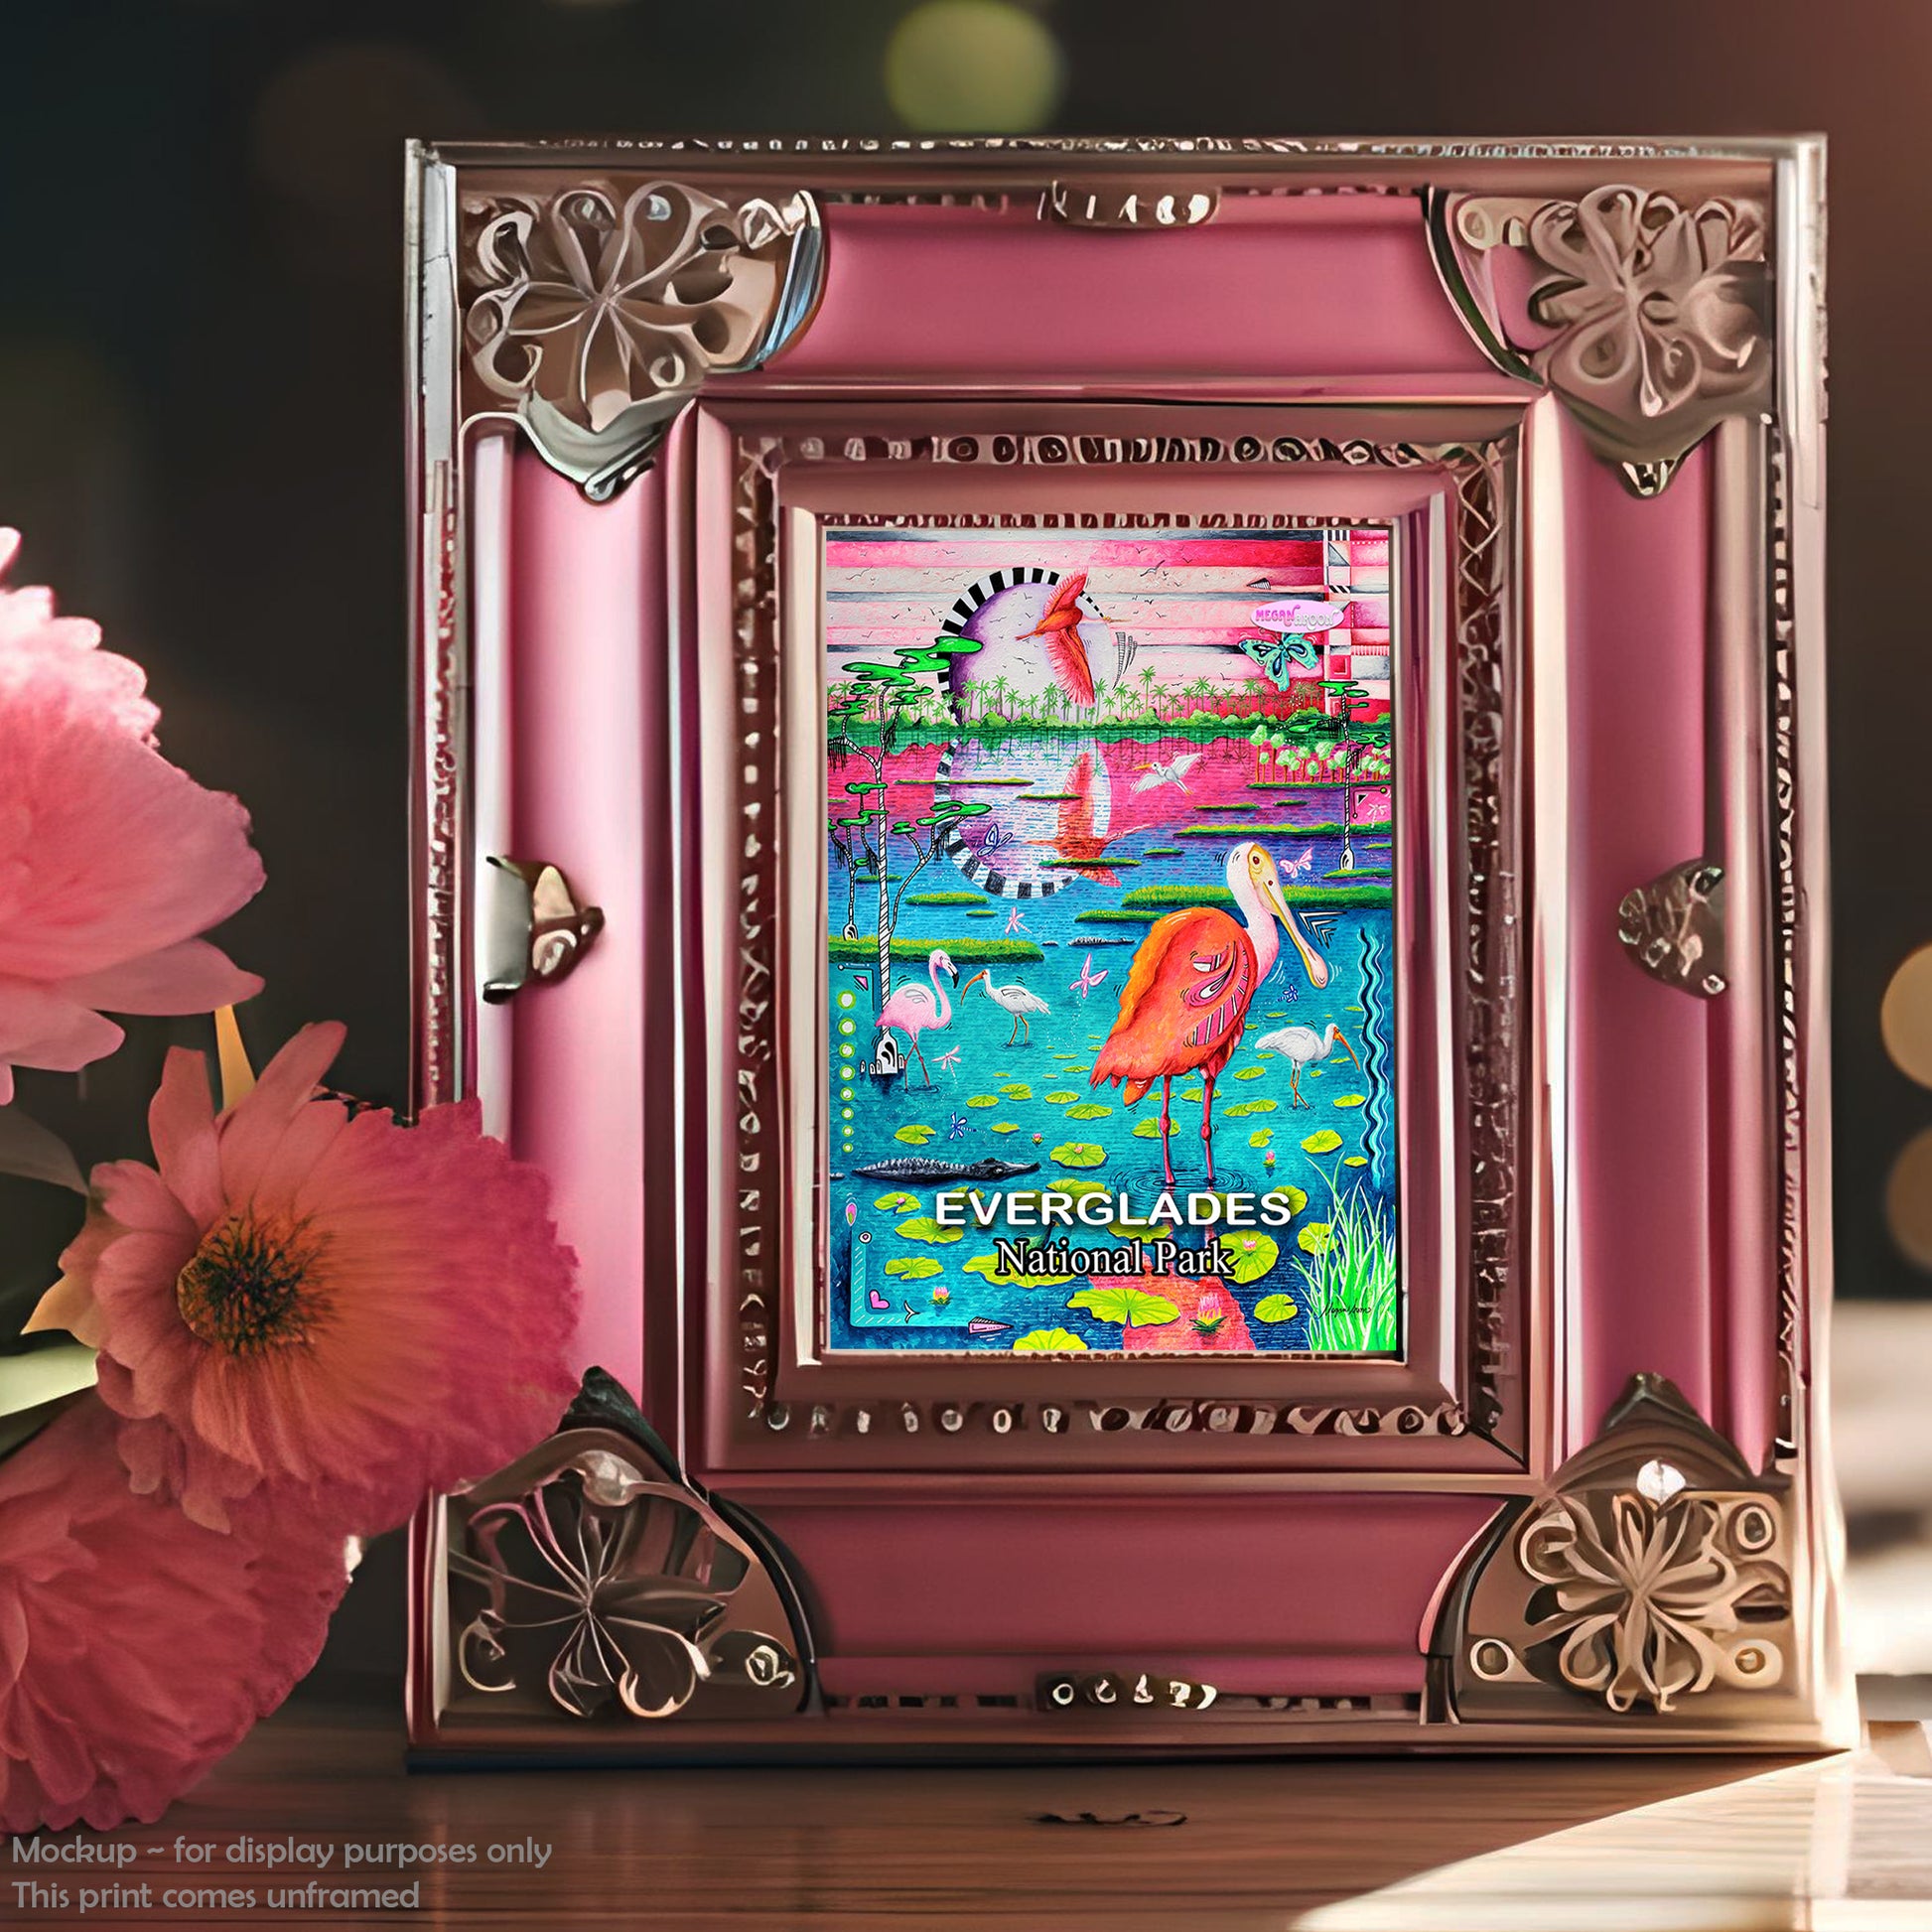 everglades national park travel poster print in a whimsical, colorful pop art style by traveling artist meganaroon in an ornate rose colored frame